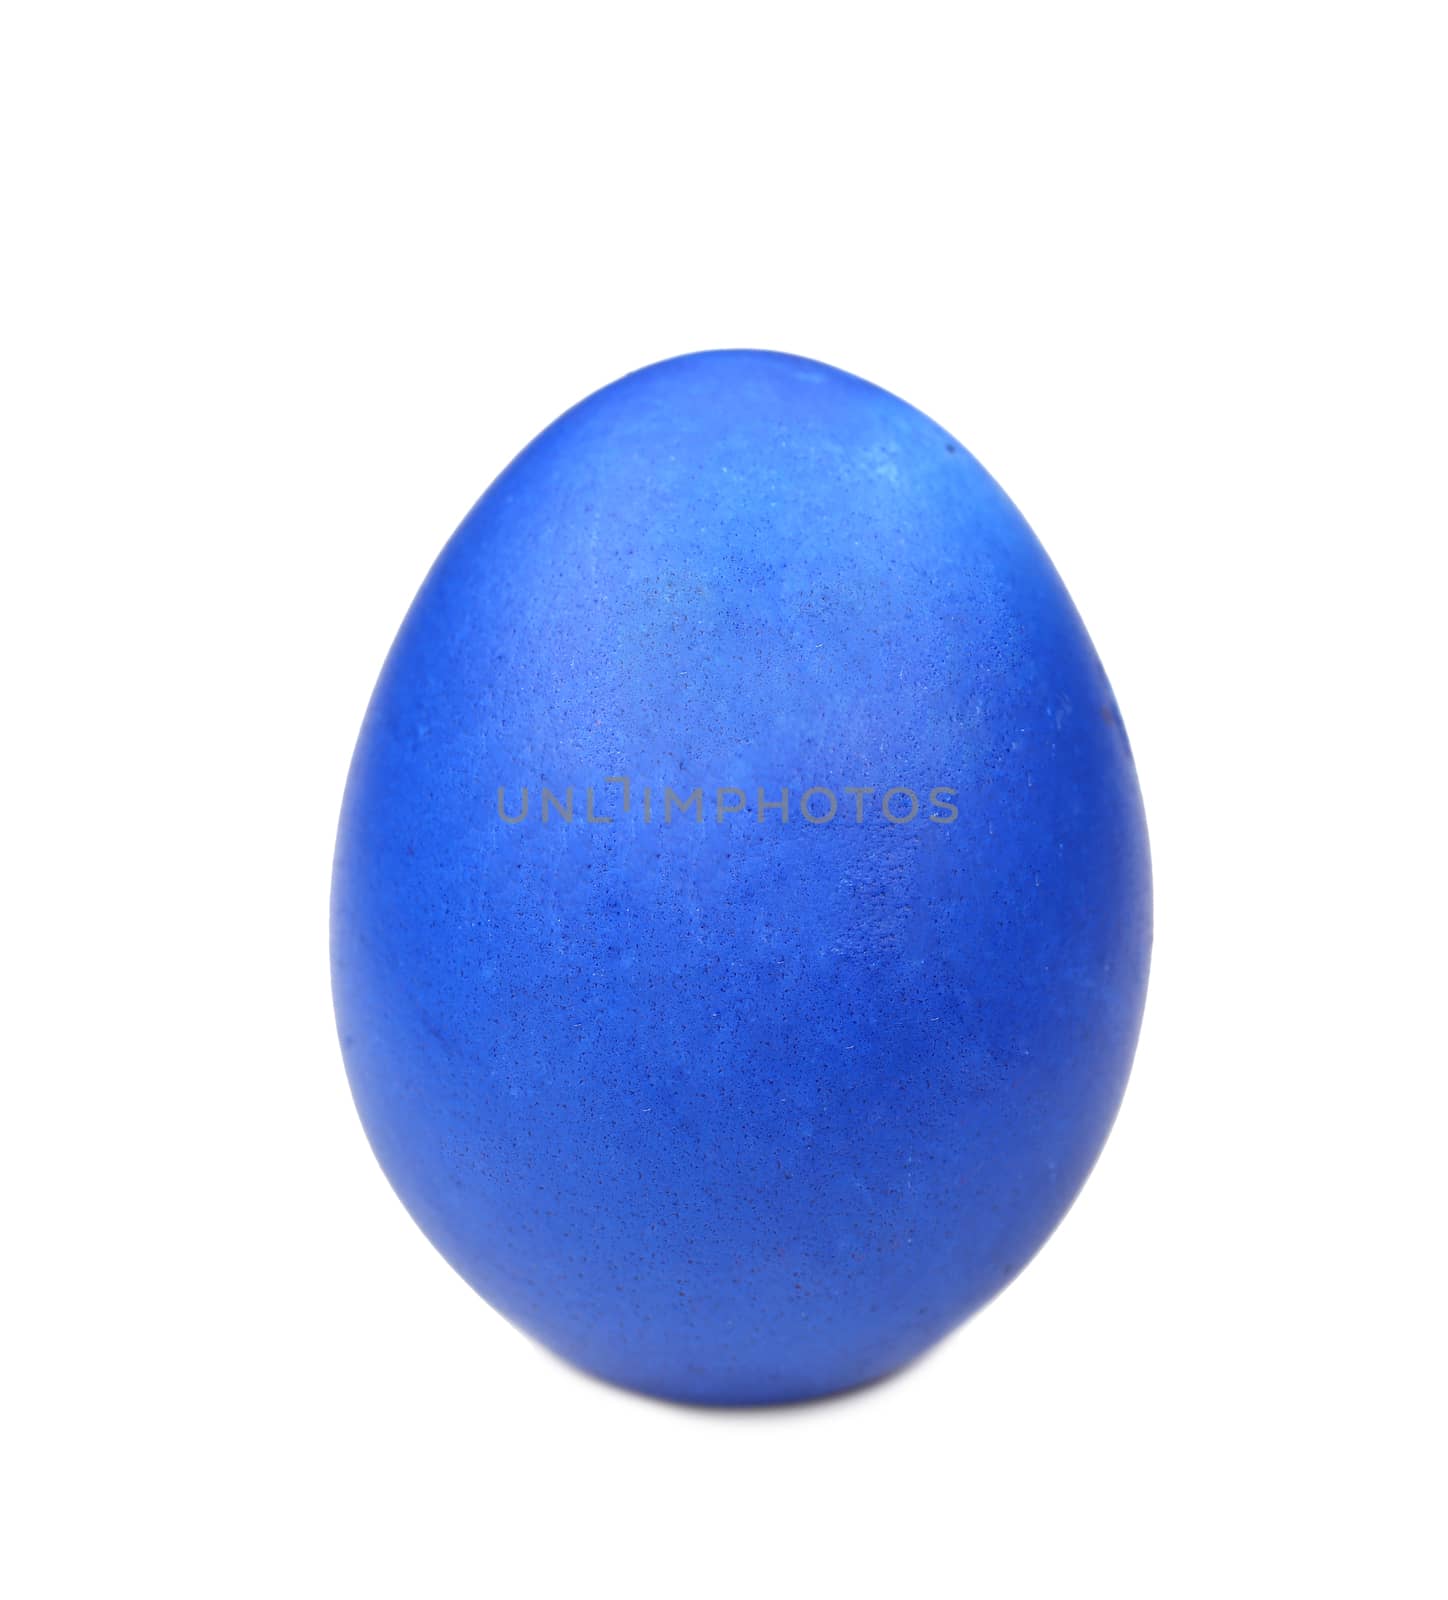 Close up of blue easter egg. Isolated on a white background.